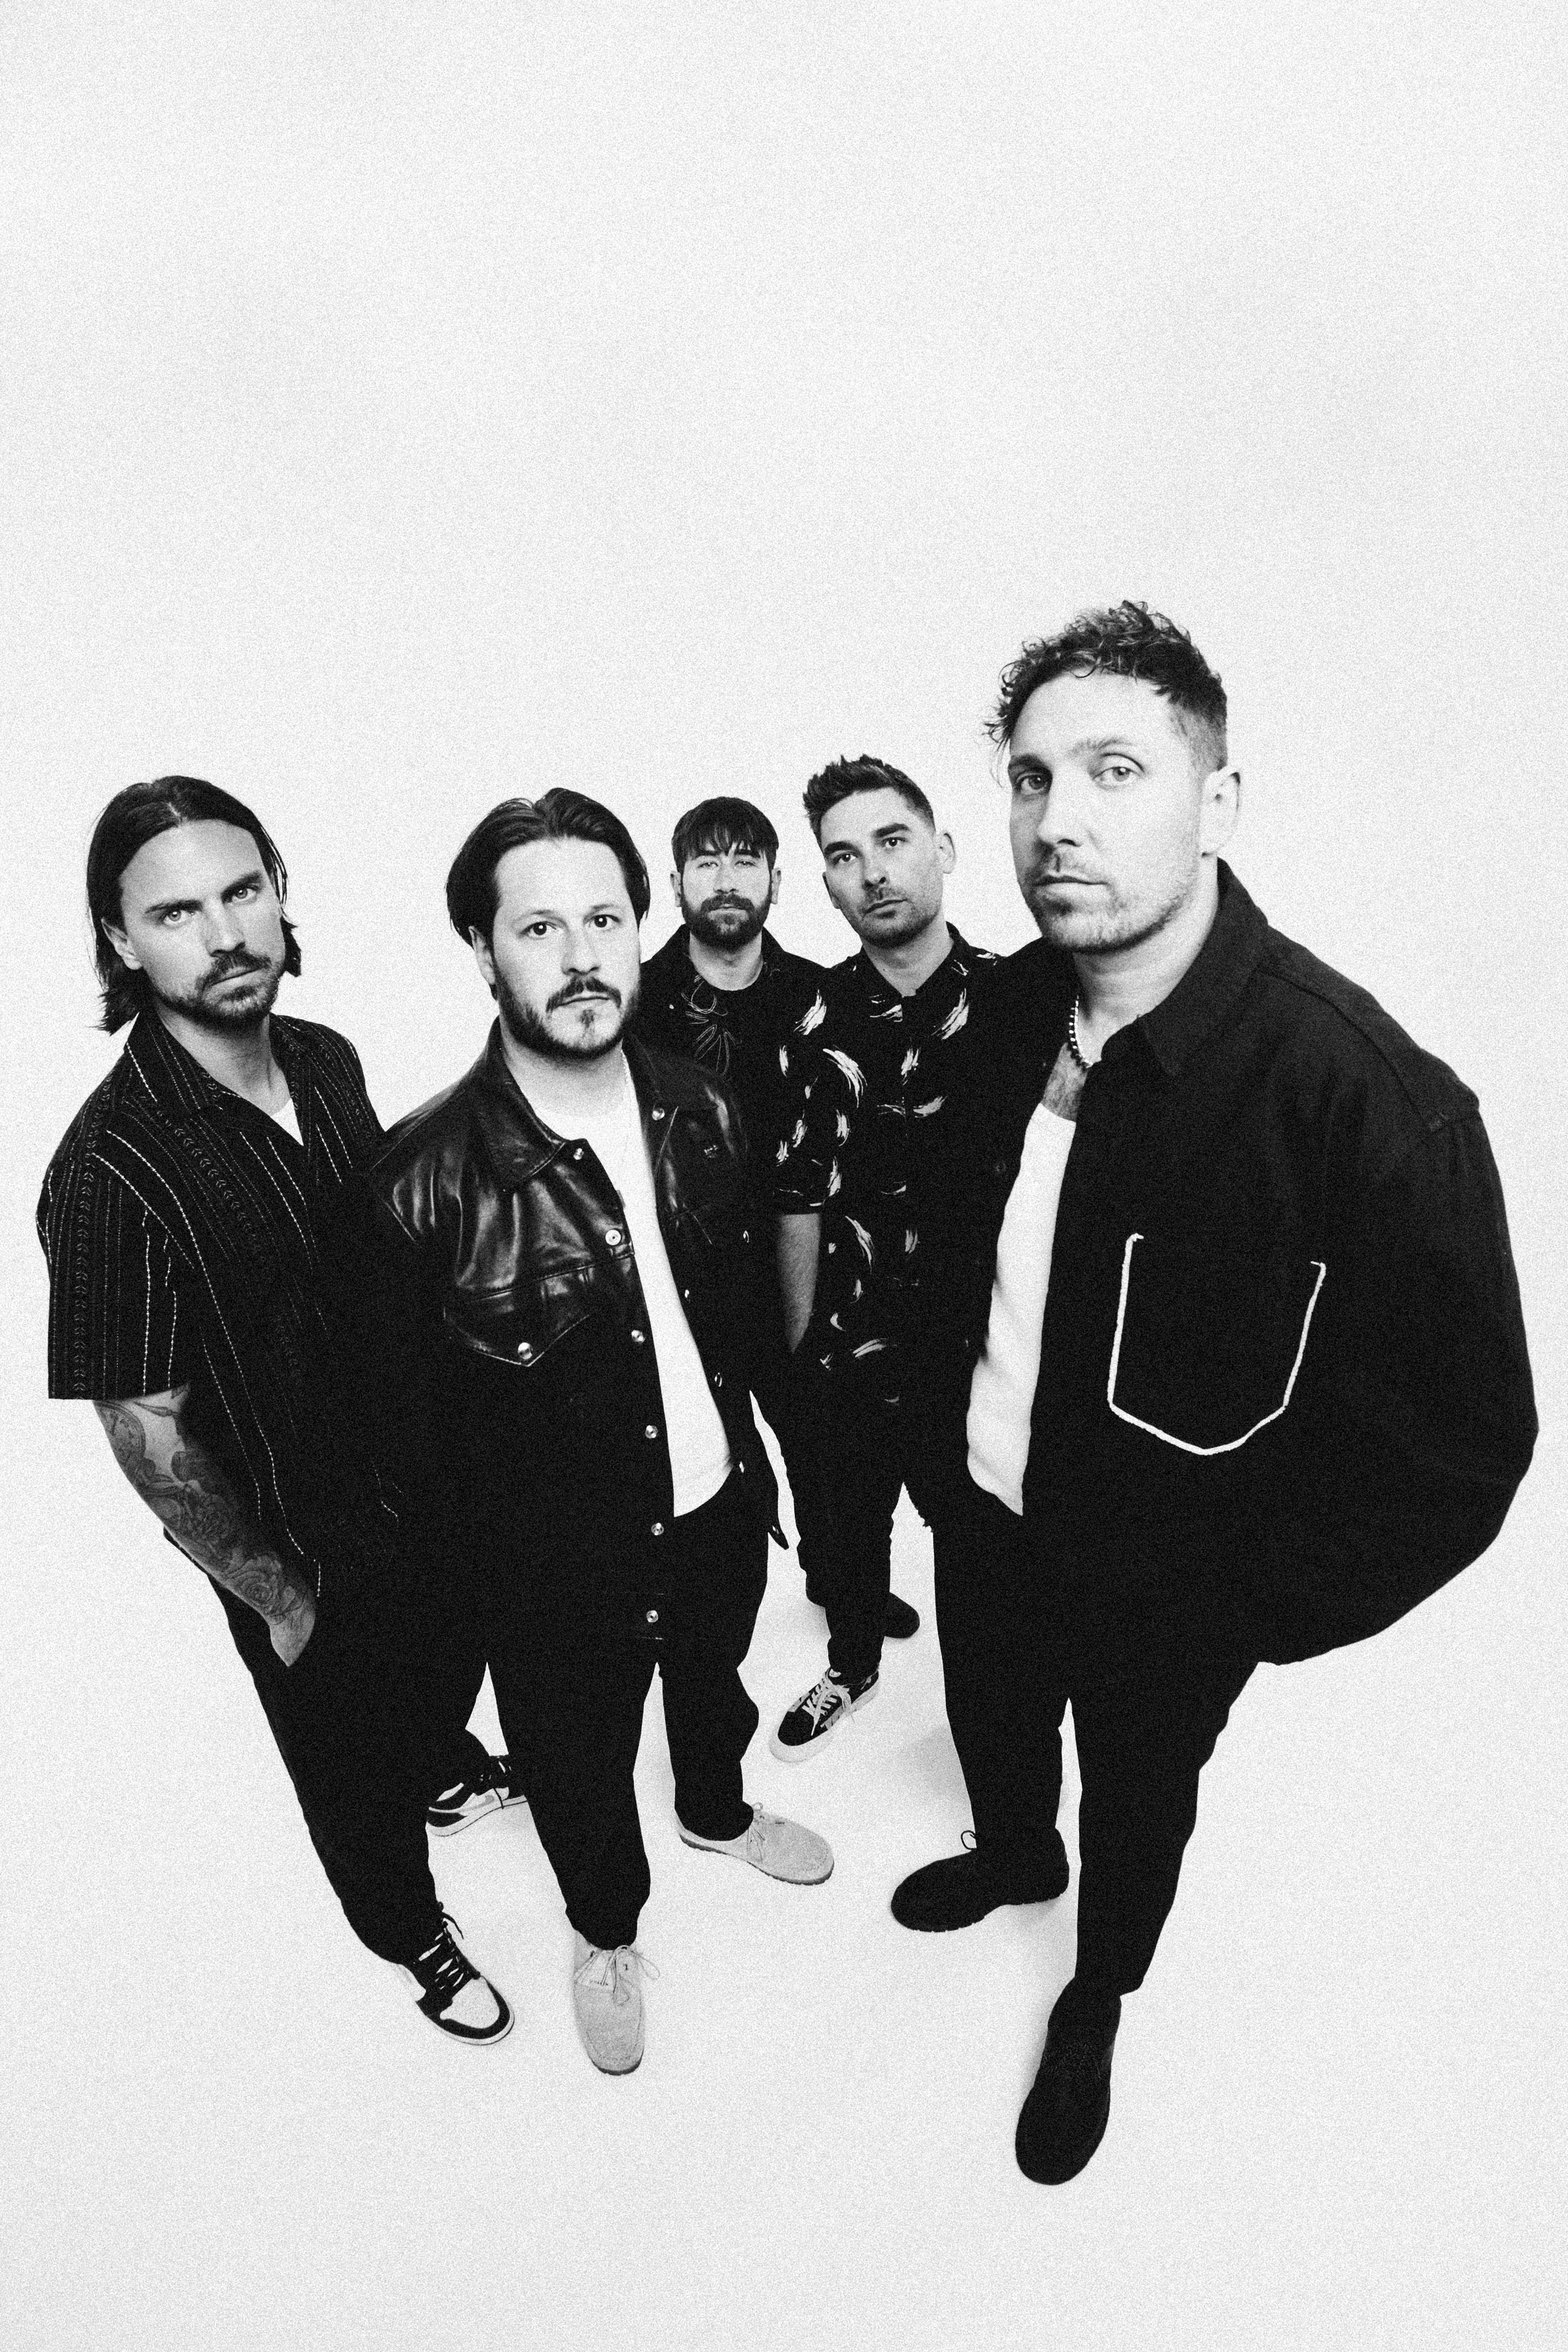 You Me At Six - the Final Nights of Six pre-sale code for genuine tickets in Glasgow